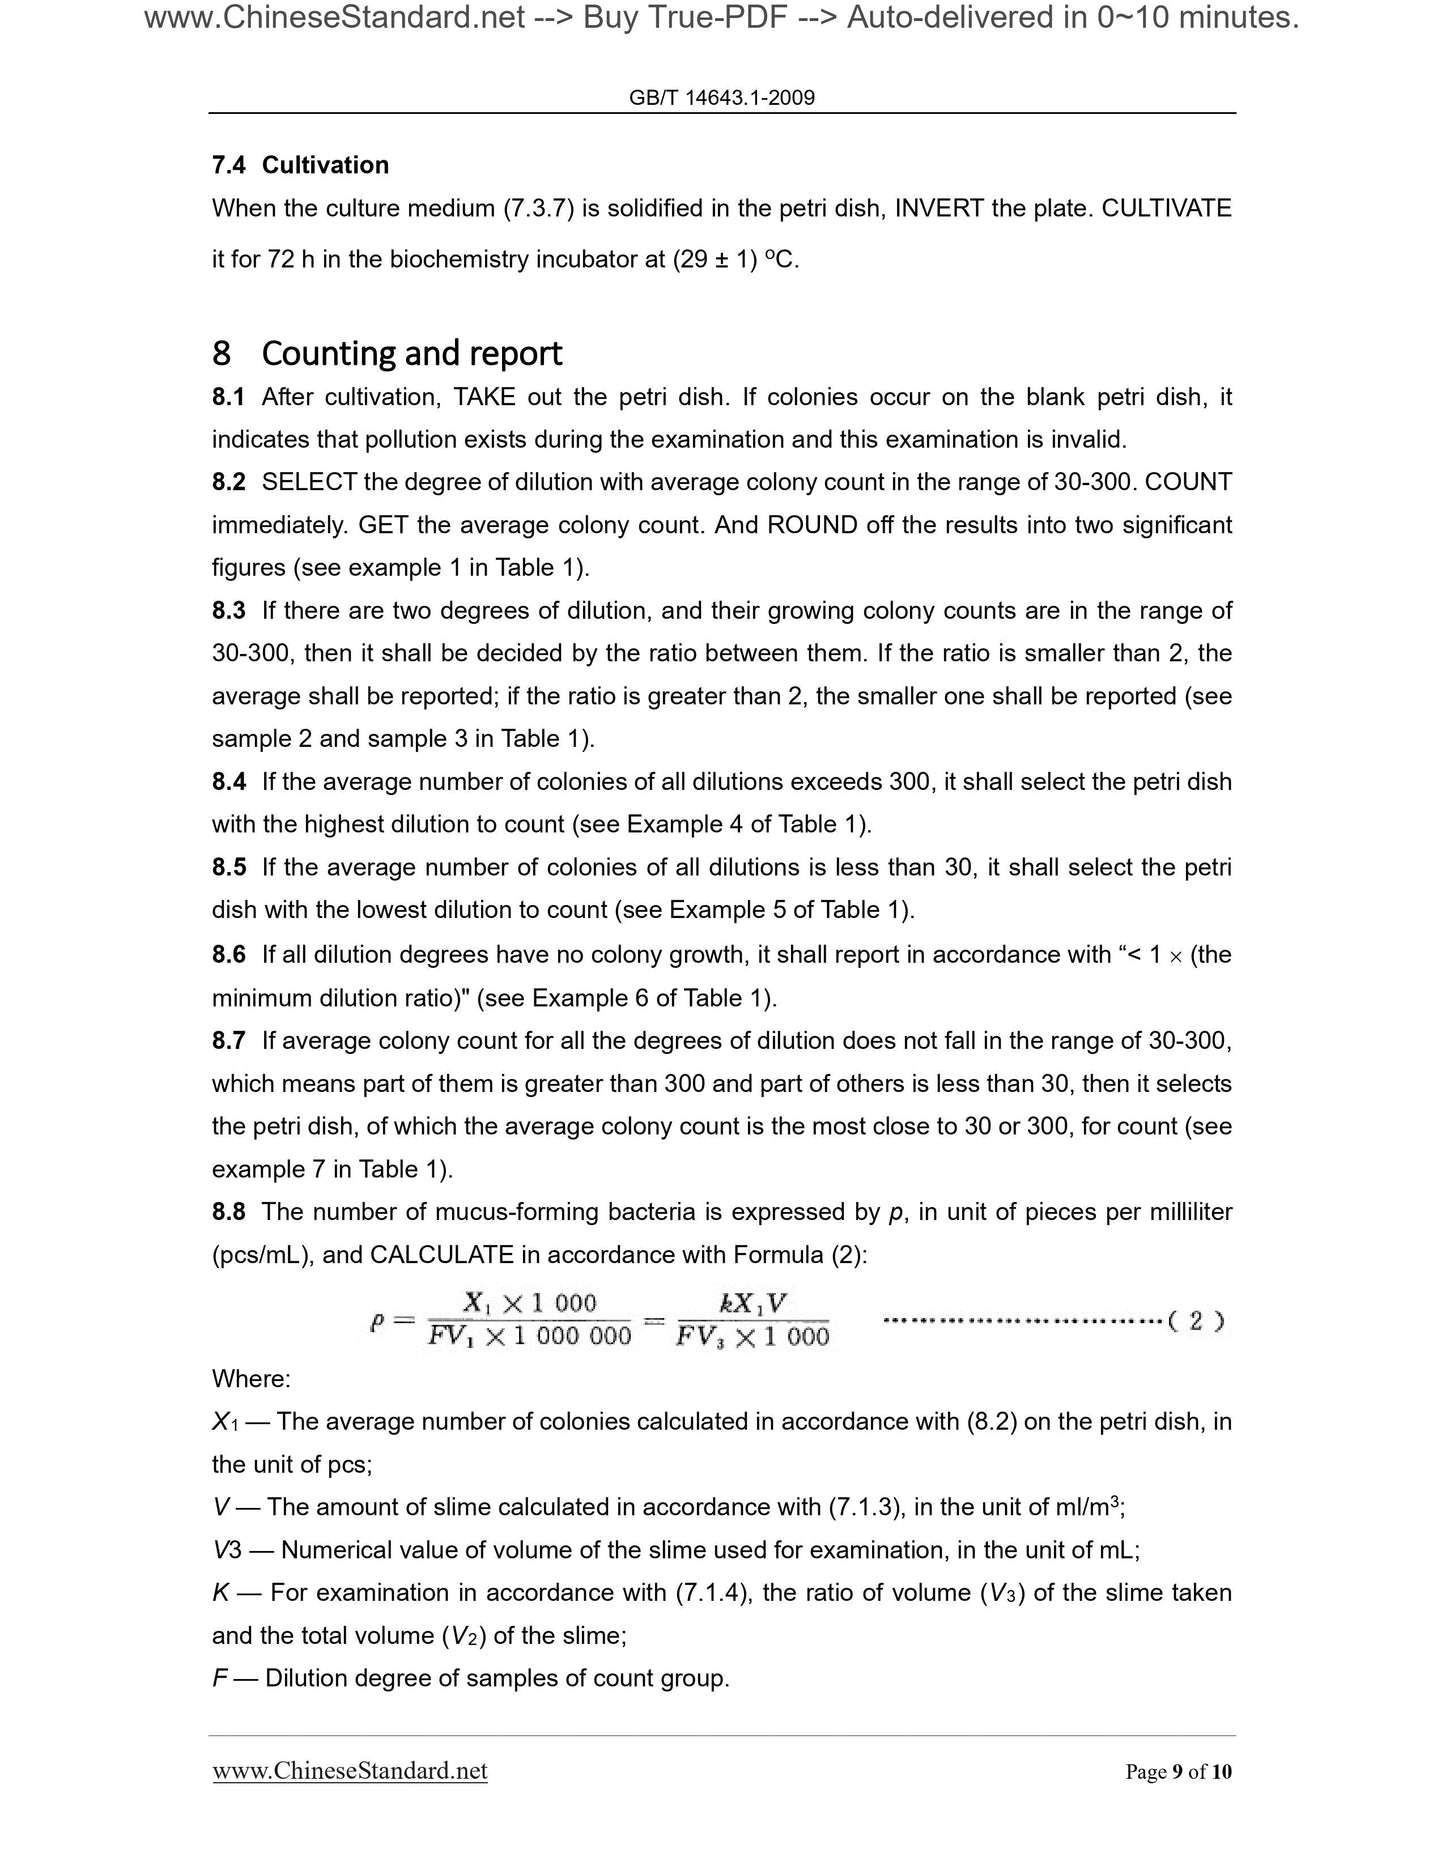 GB/T 14643.1-2009 Page 5